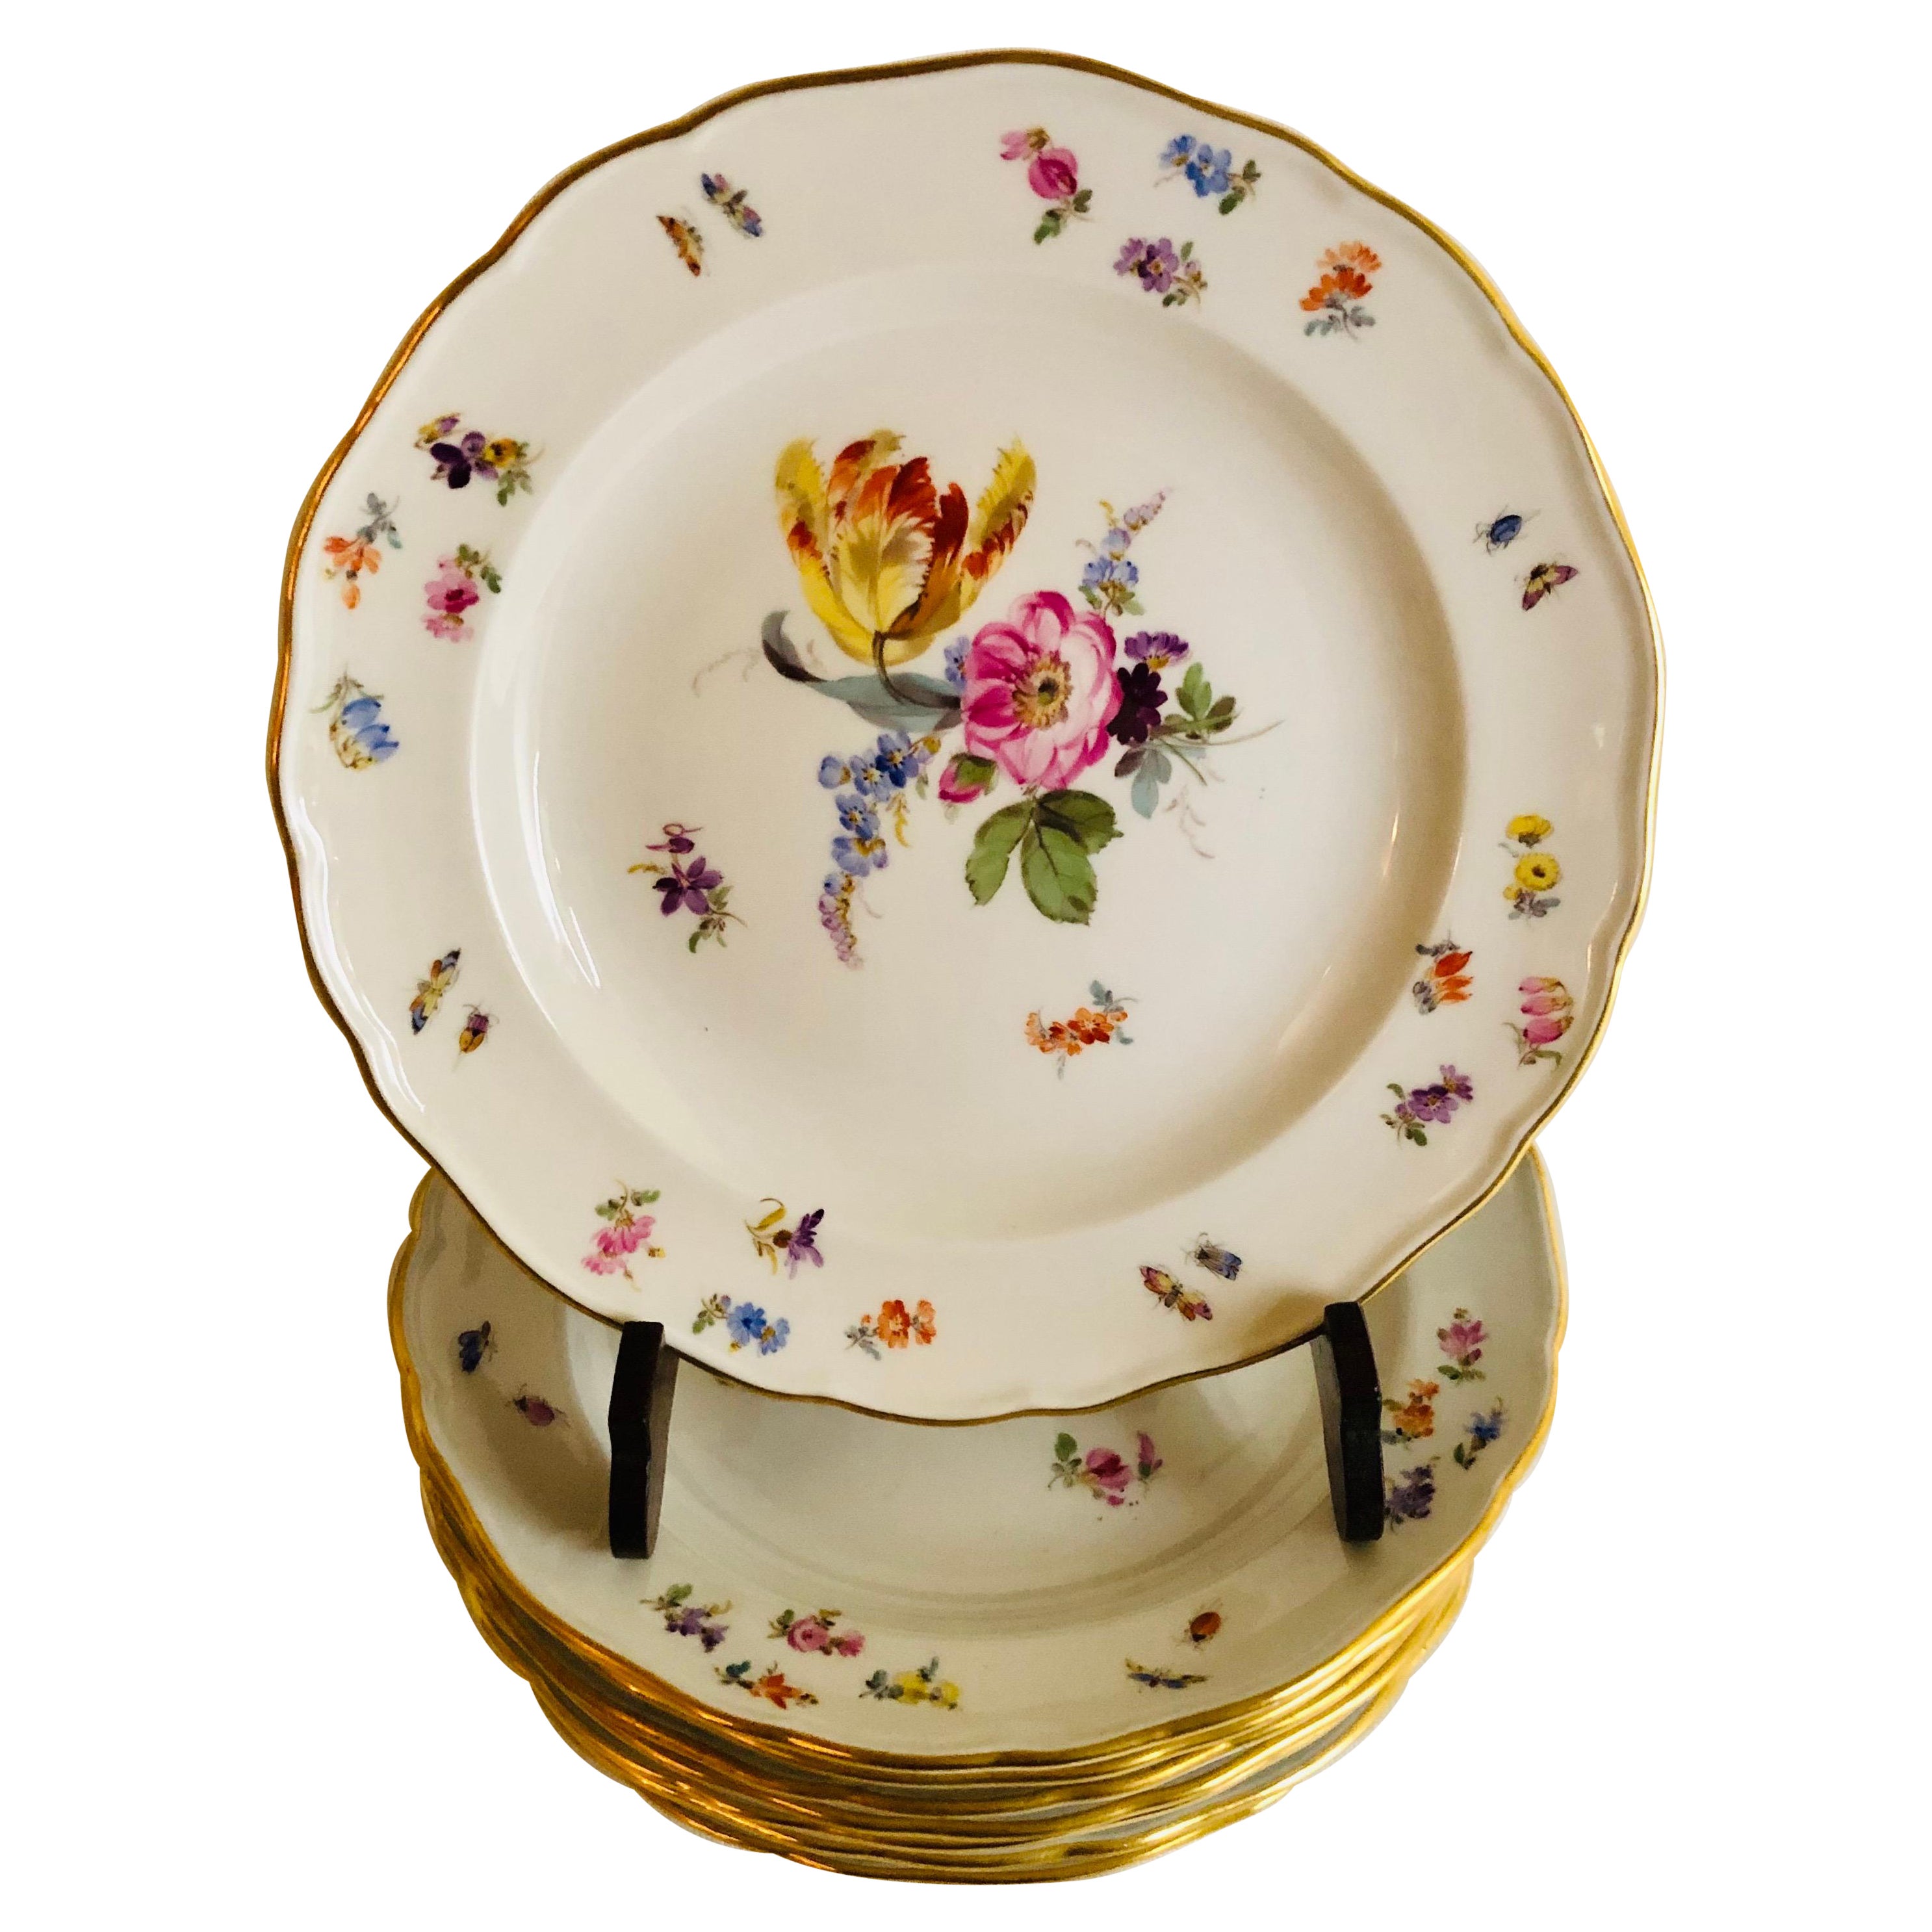 Set of Eight Meissen Dessert Plates Each Painted with a Different Flower Bouquet